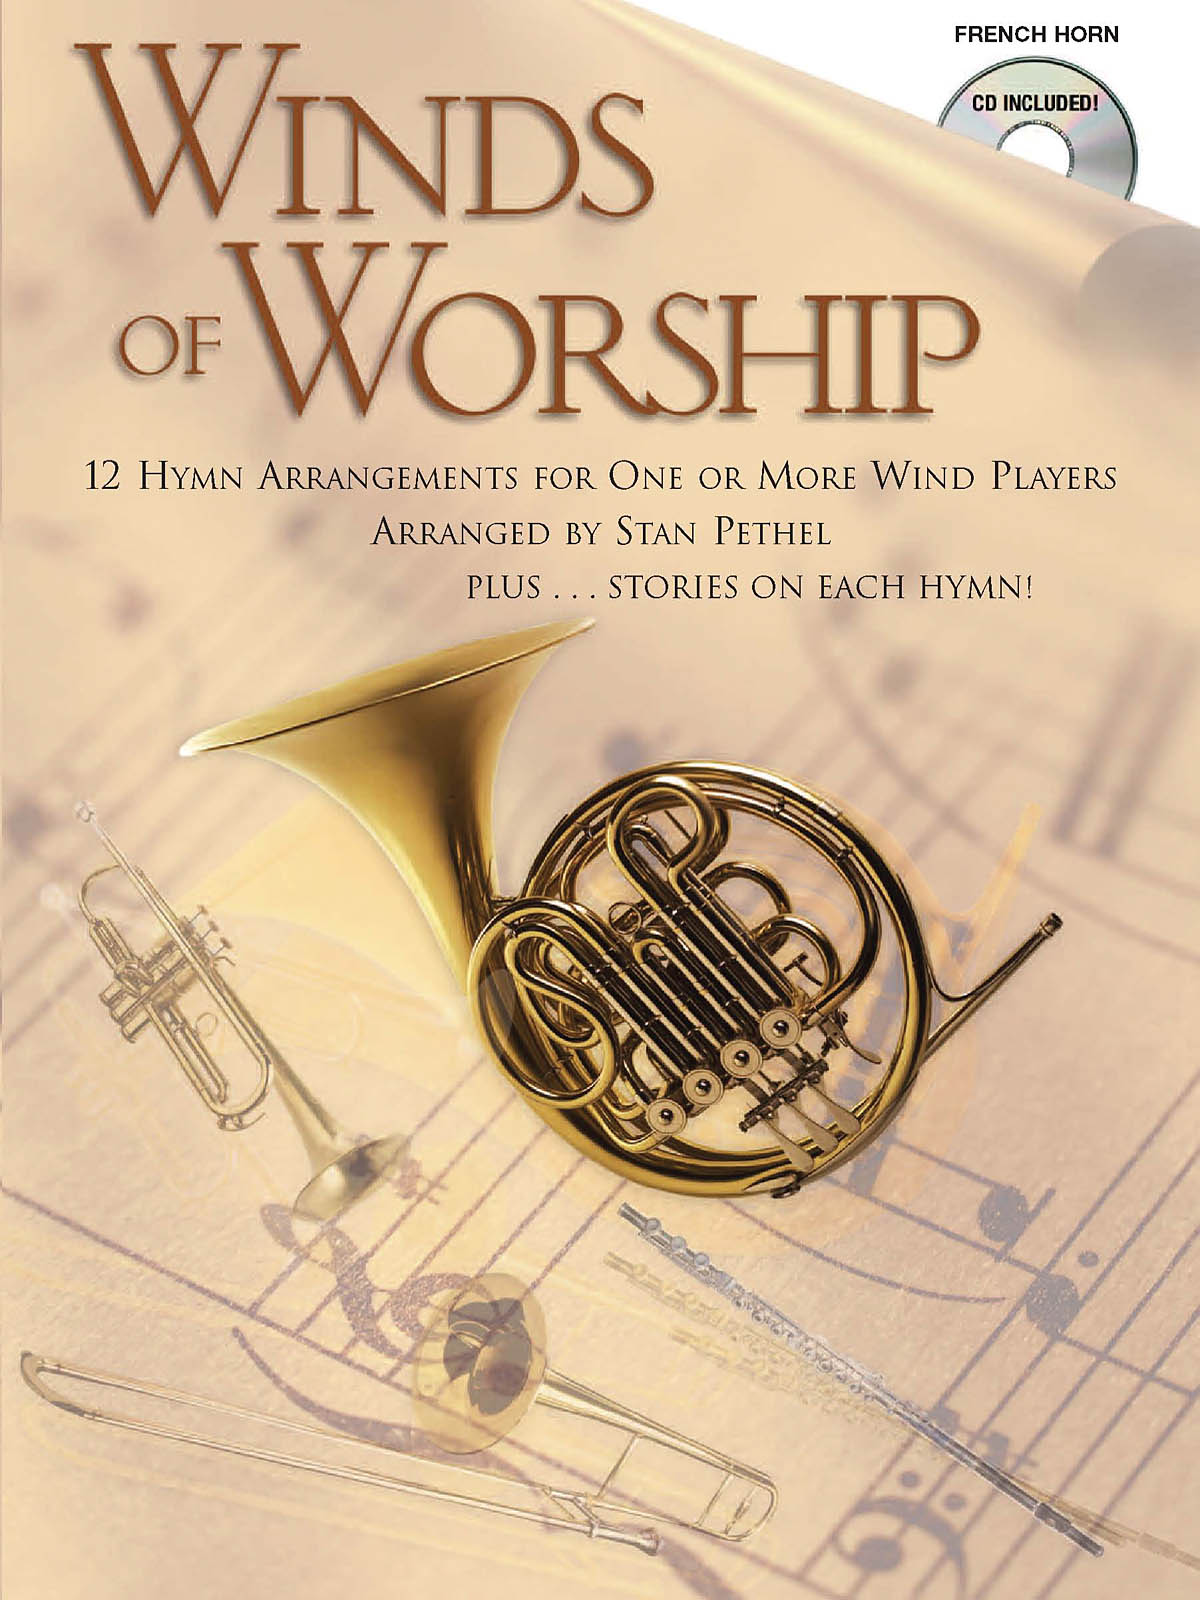 Winds of Worship - French Horn